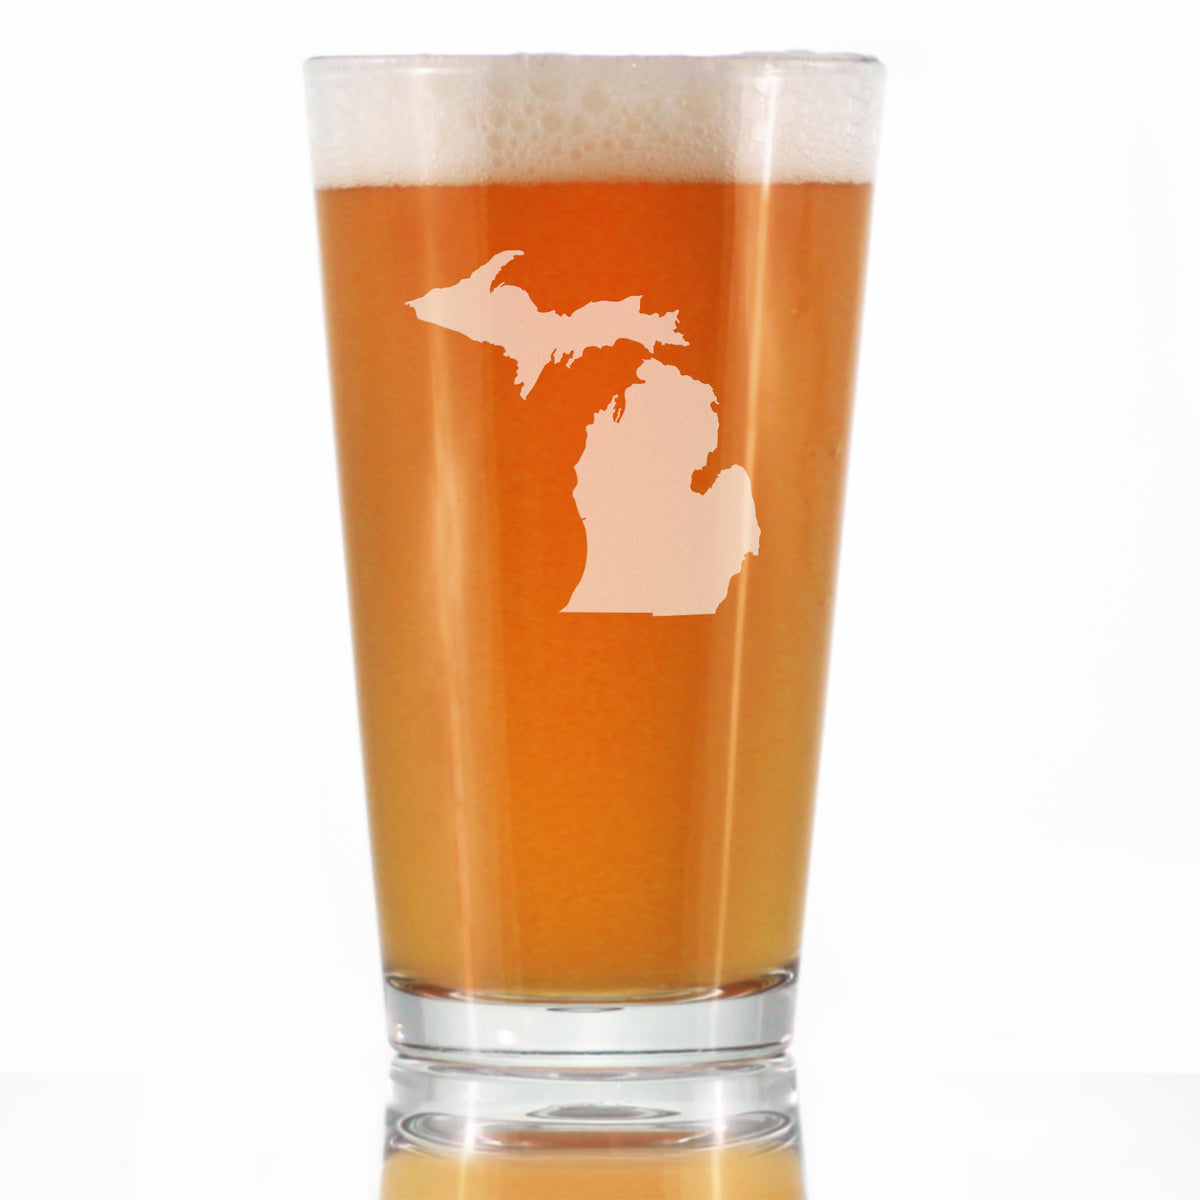 Michigan State Outline Pint Glass for Beer - State Themed Drinking Decor and Gifts for Michigander Women &amp; Men - 16 Oz Glasses